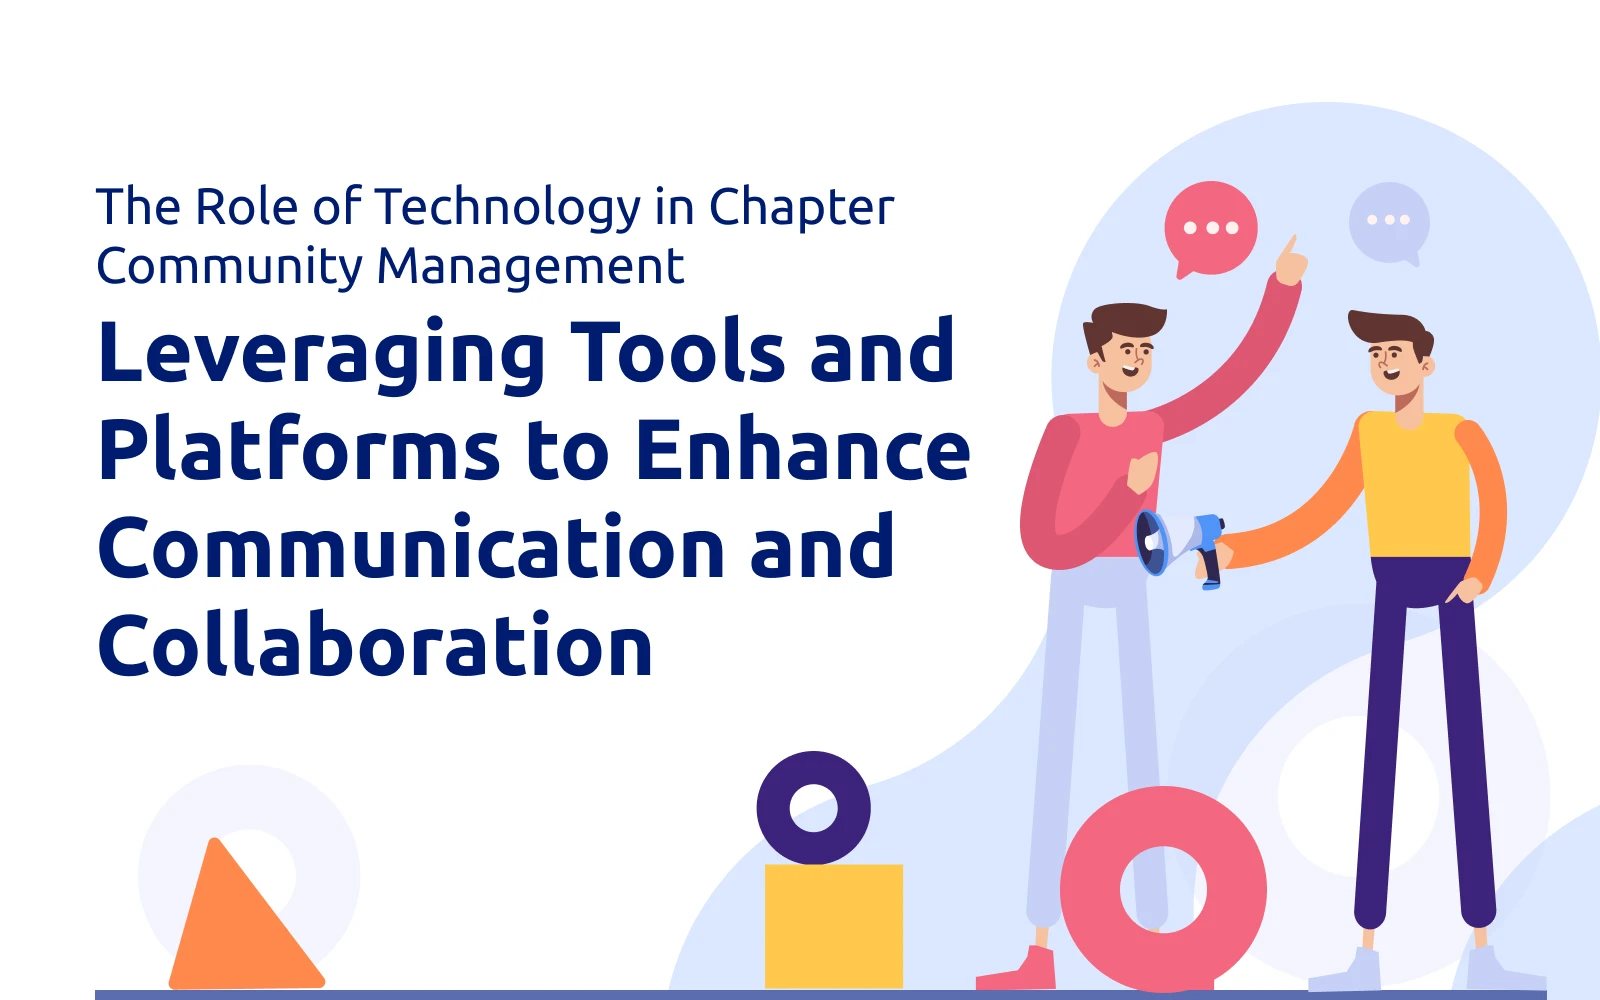 The Role of Technology in Chapter Community Management: Leveraging Tools and Platforms to Enhance Communication and Collaboration